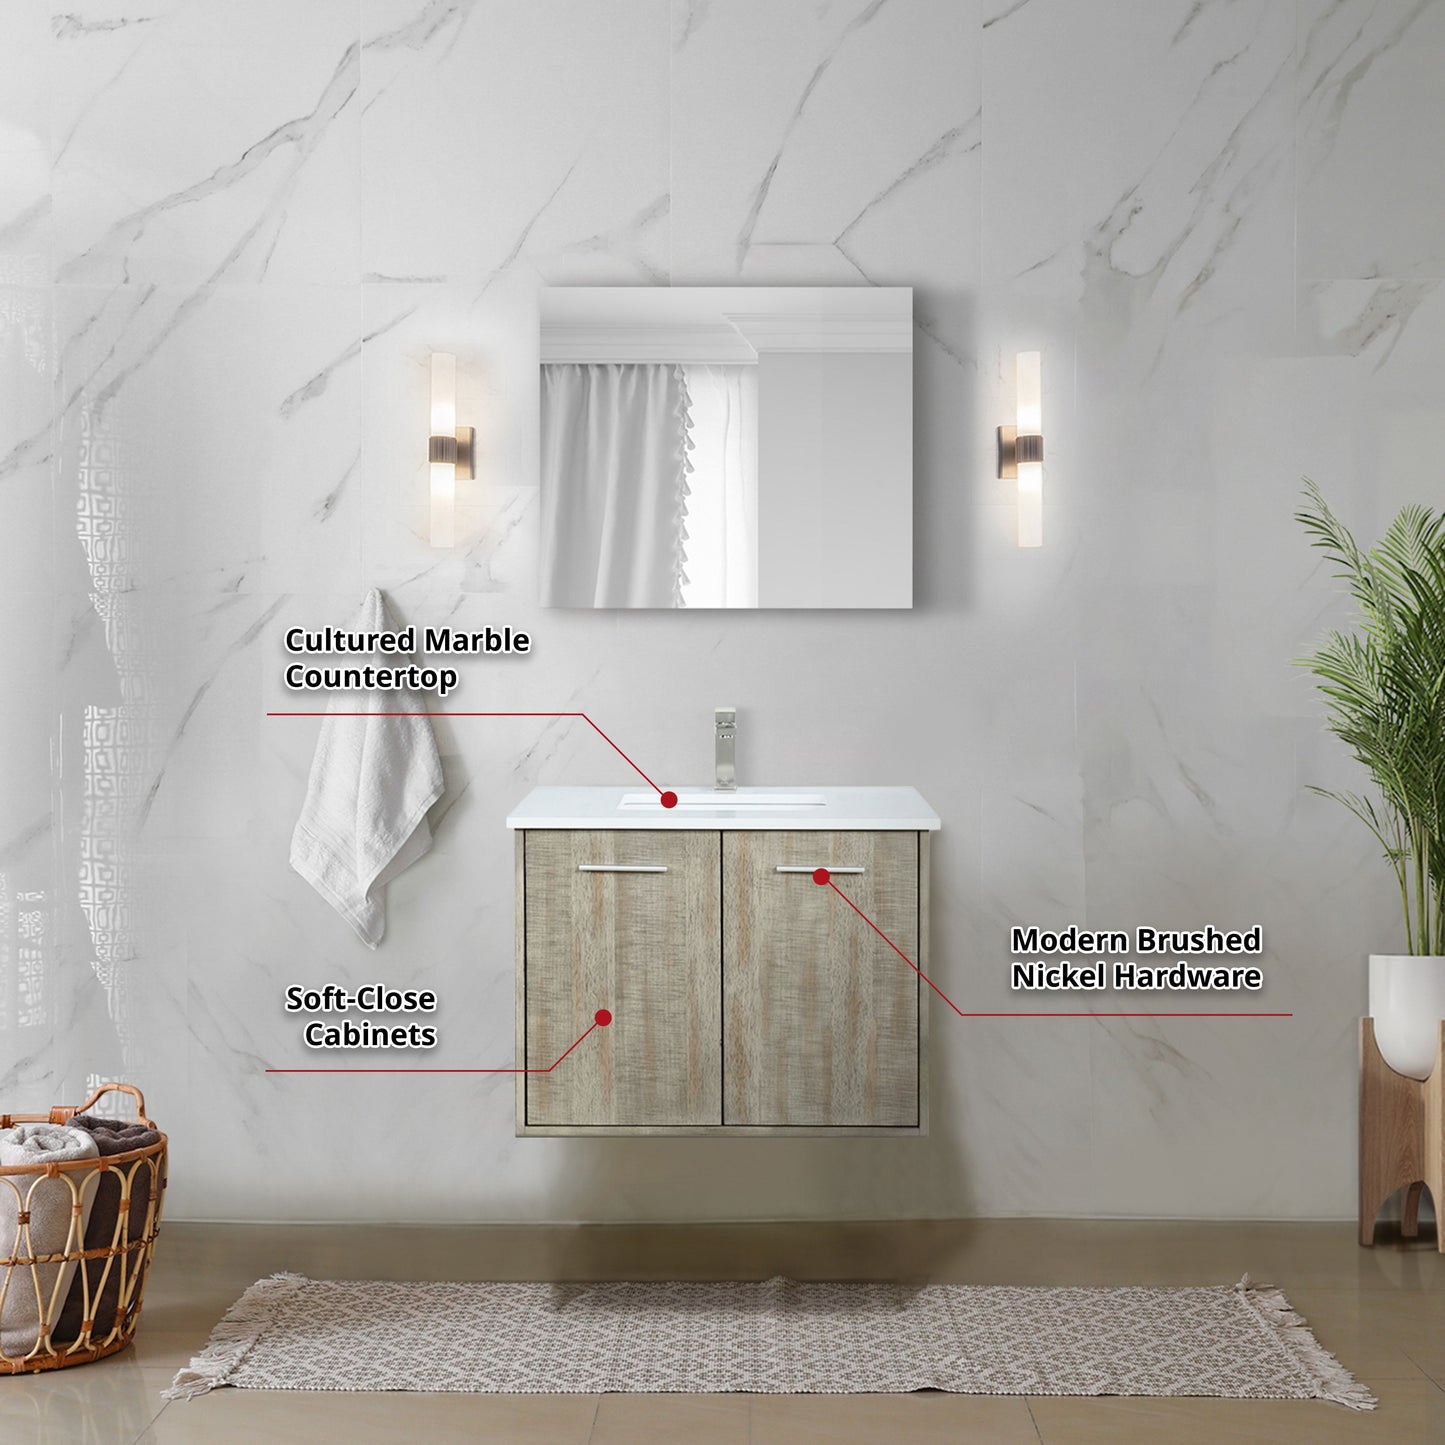 Lexora Collection Fairbanks 30 inch Rustic Acacia Bath Vanity, Cultured Marble Top and Faucet Set - Luxe Bathroom Vanities